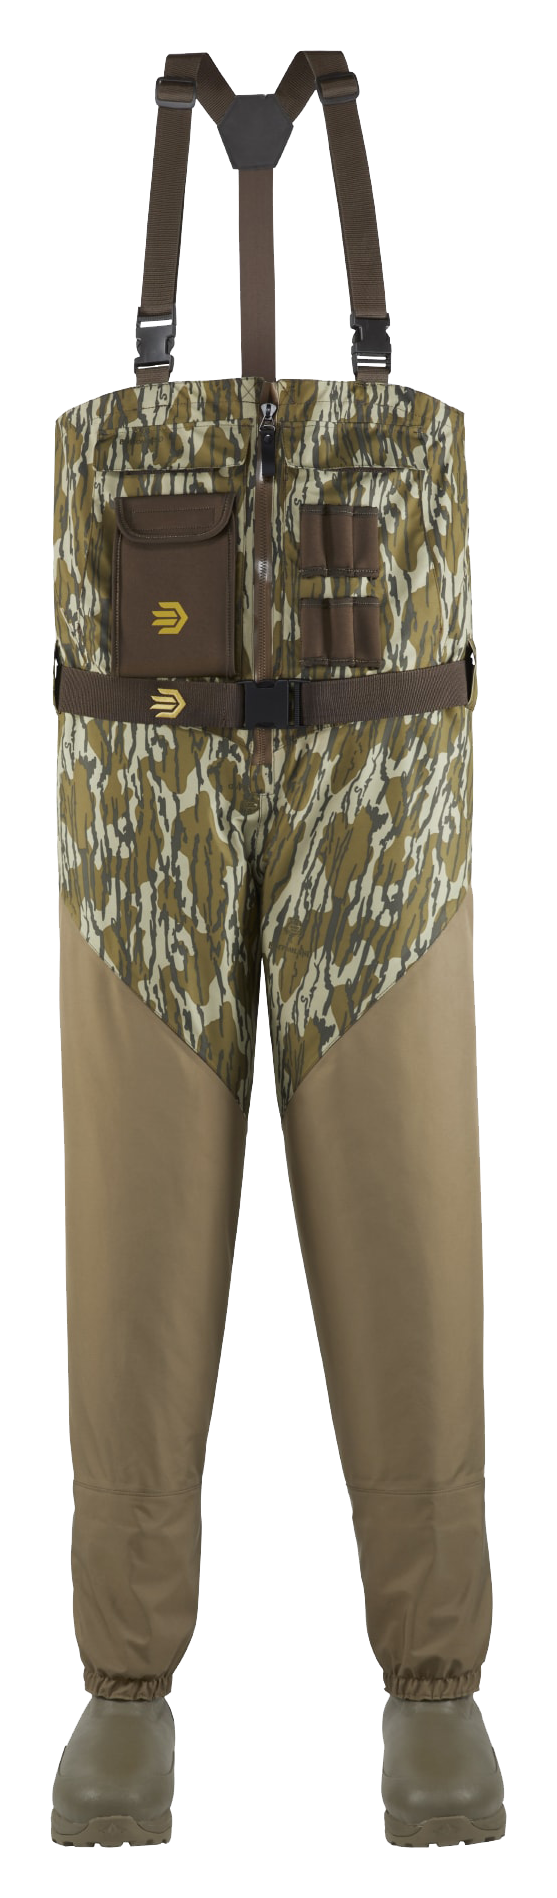 LaCrosse Alpha Agility Select Insulated Front-Zip Breathable Hunting Waders for Men - Mossy Oak Original Bottomland - 11/Medium